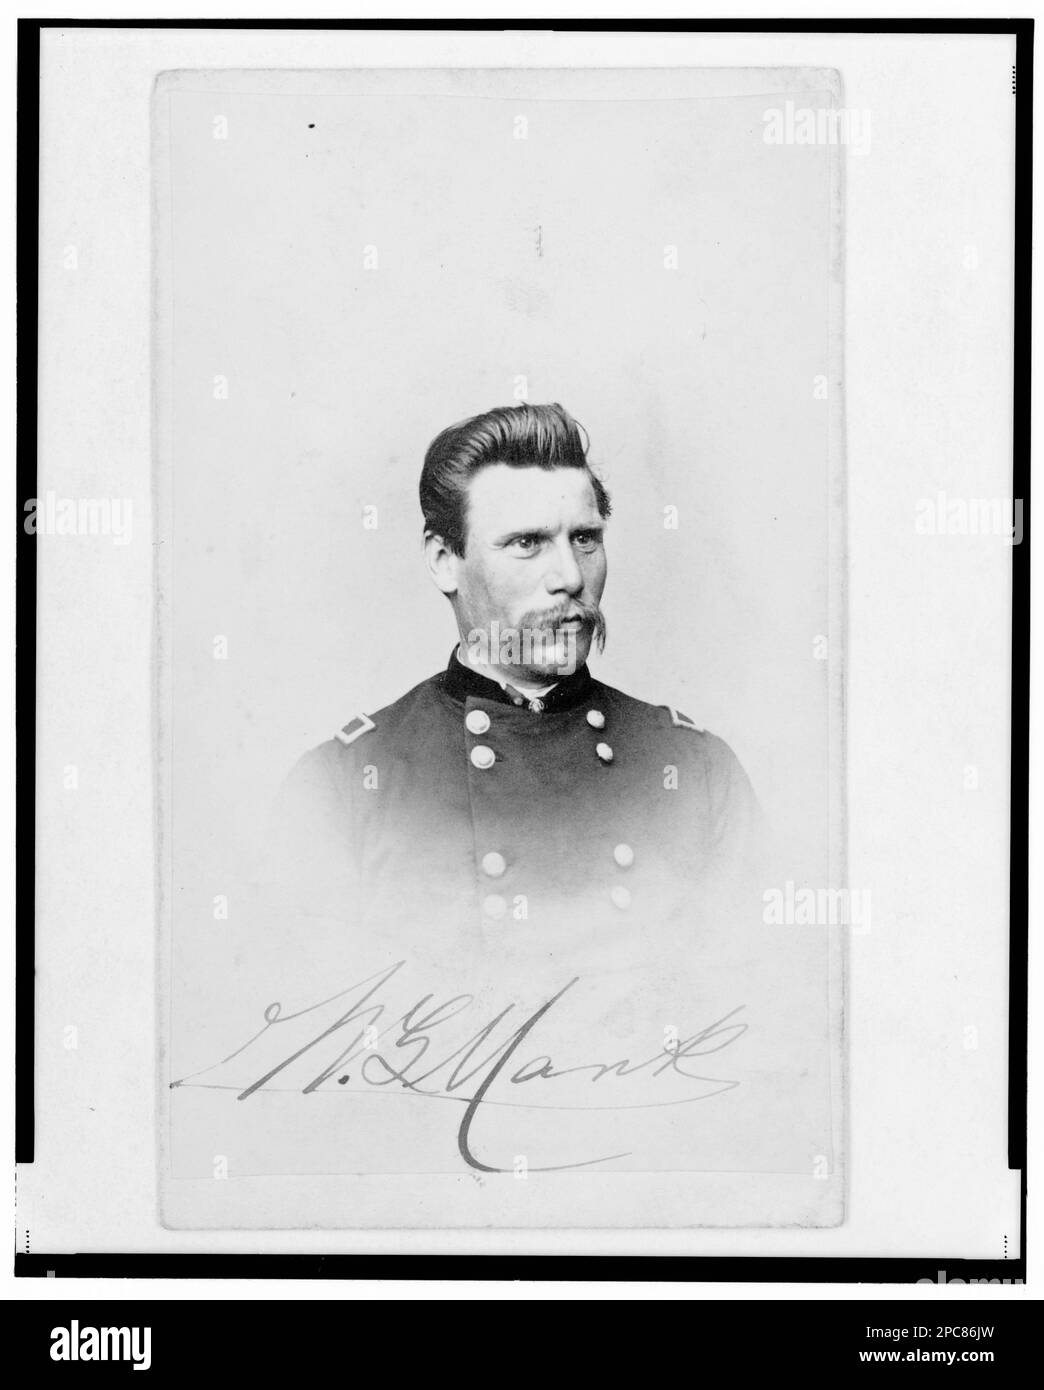 Major William G. Mank, Union officer in the 32nd Indiana Regiment, head-and-shoulders portrait, facing front / Henry Ulke, Washington, D.C.. Title devised by Library staff, In: Adolph Metzner photograph album ., no. 22, Color laser copy reference surrogate, showing front and back of photo, filed with finding aids for LOT 8751 in P&P Reading Room. Mank, William G, 1831-1887, Military service, United States, Army, Indiana Infantry Regiment, 32nd (1861-1865), People, United States, History, Civil War, 1861-1865, Military officers, Union. Stock Photo